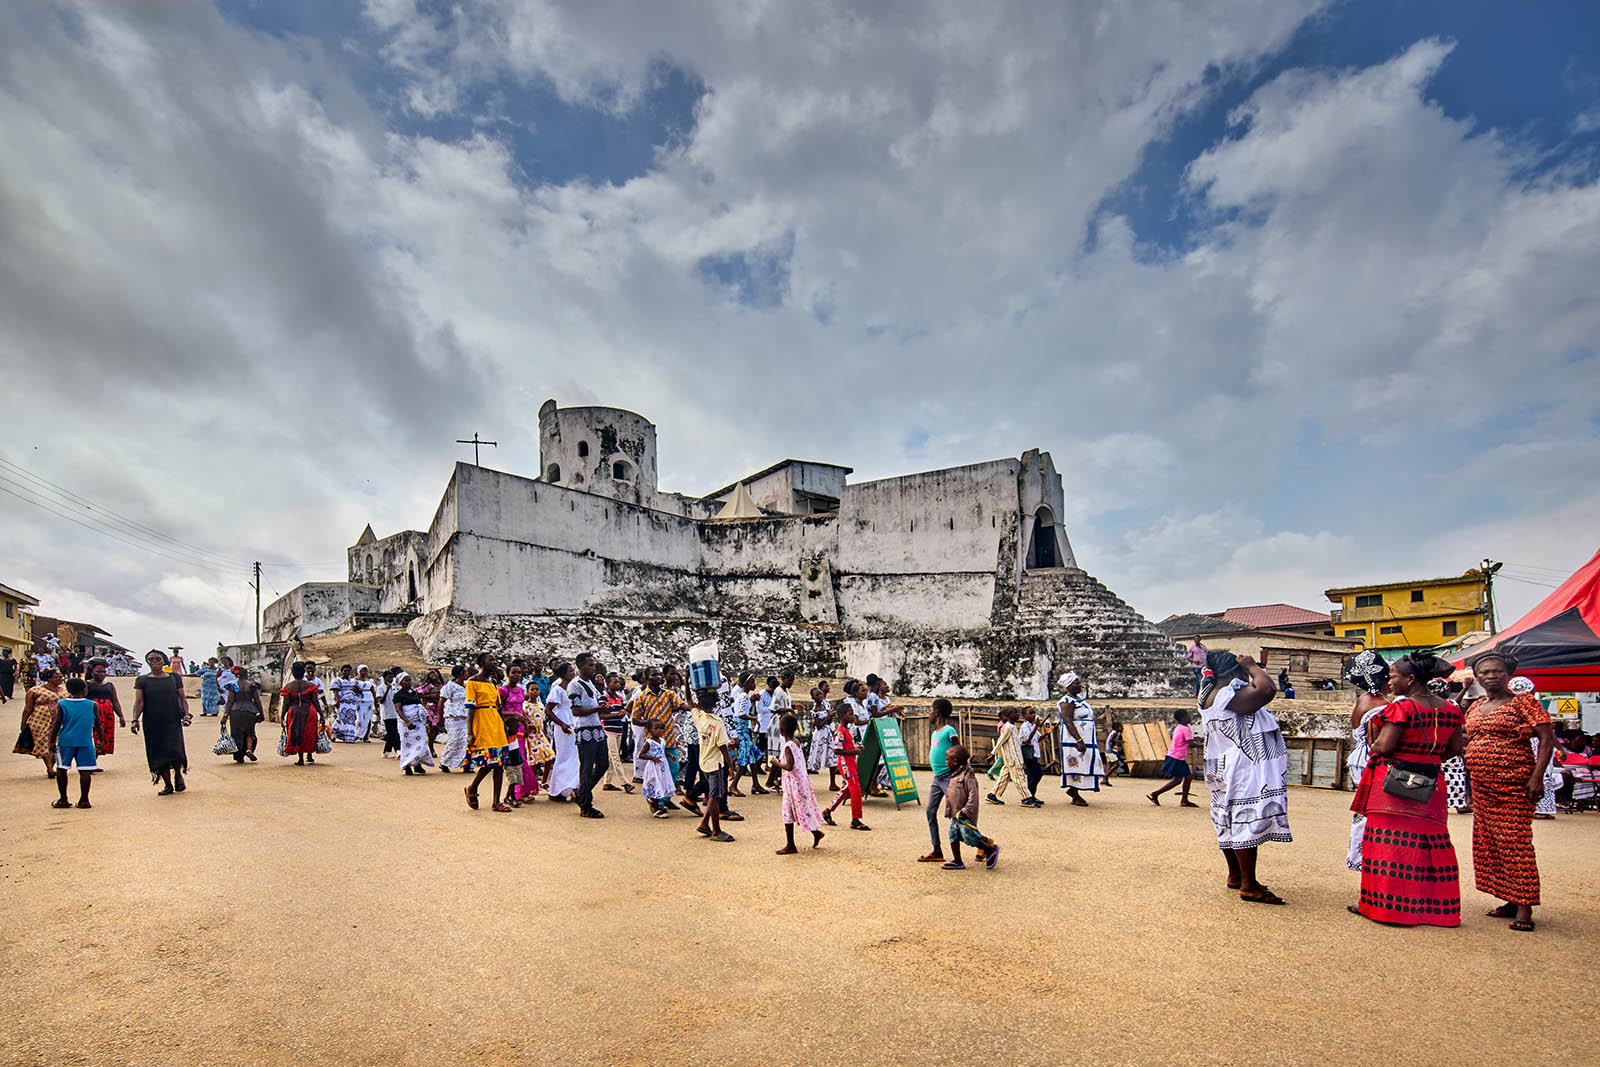 A photo of a crowd of people with a white washed fort in the background.